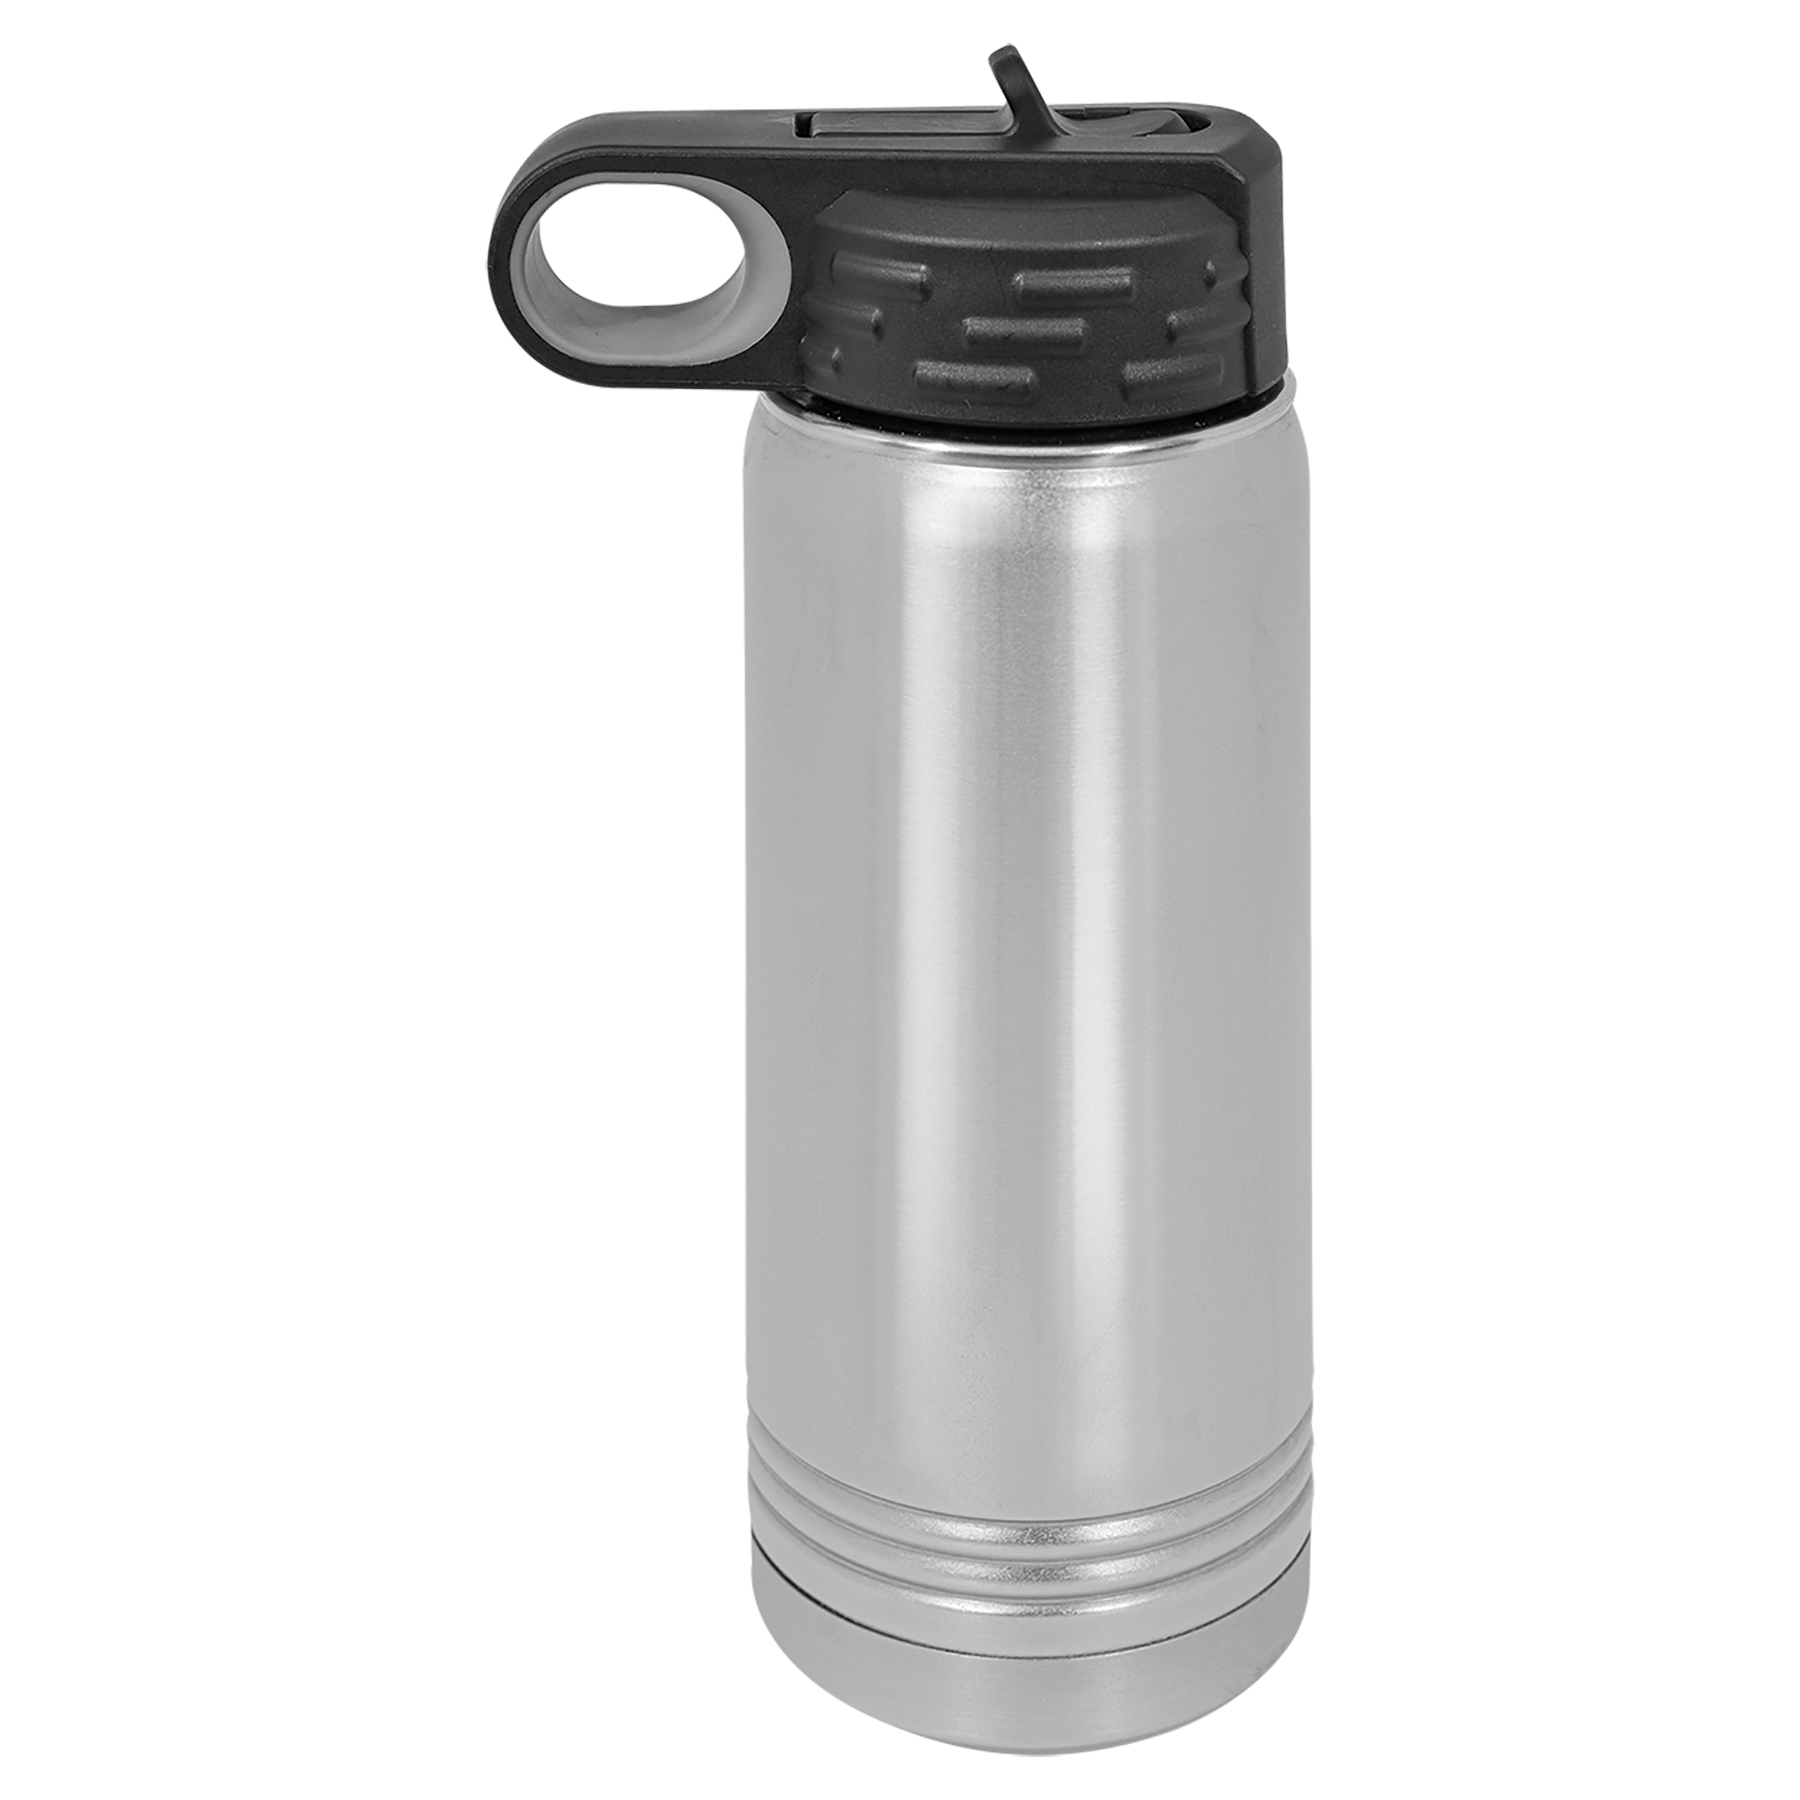 Stainless Steel 20oz Water Bottle -One Free Engraving -Double-wall Vacuum Insulated -Made from 18/8 Gauge Stainless Steel (Type 304 Food Grade) -Lid is BPA Free (Hand Wash Only) -Not recommended for Dishwasher -Works with Cold and Hot Drinks -18 Color Options -Perfect for Personalized Gifts, Awards, Incentives, Swag & Fundraisers